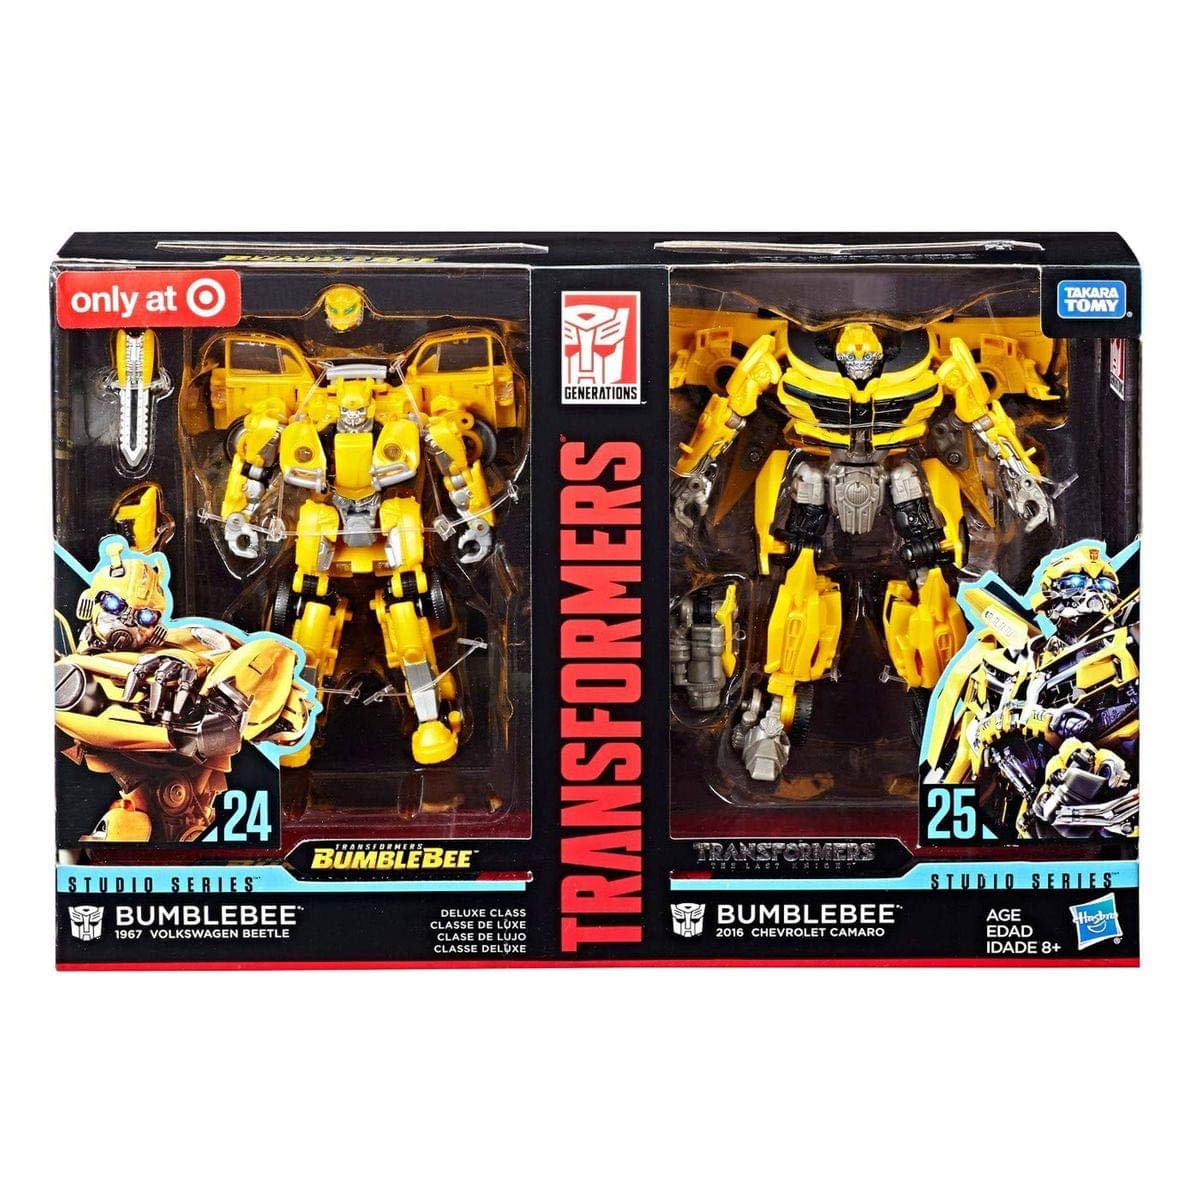 Mua Transformers Studio Series 24 and 25 Deluxe Class Bumblebee 2-pack  Including 1967 Volkswagen Beetle Bumblebee Movie Version and 2016 Chevrolet  Camaro The Last Knight Movie Version trên Amazon Mỹ chính hãng 2023 |  Giaonhan247